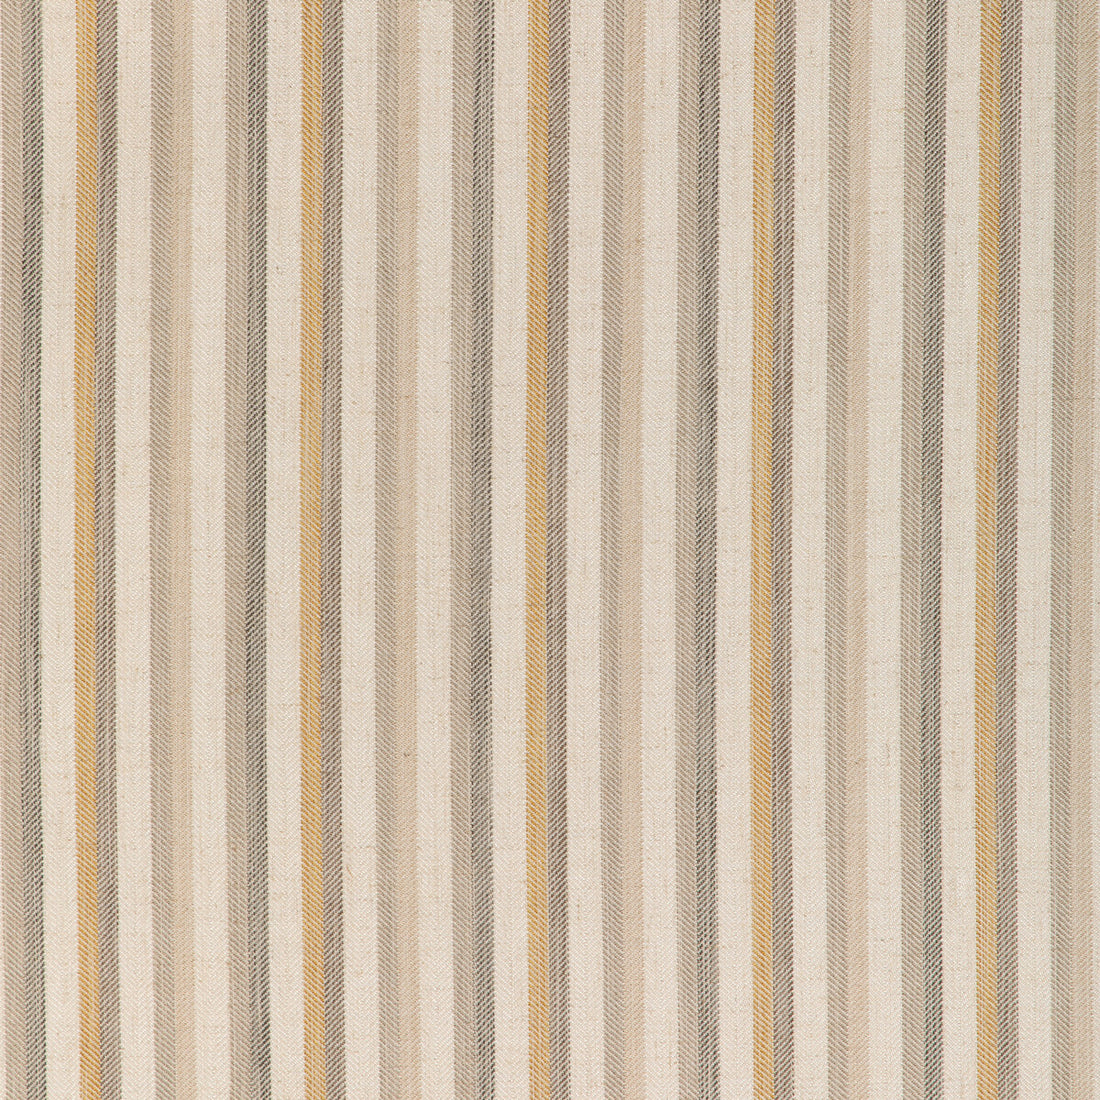 Kravet Design fabric in 37167-416 color - pattern 37167.416.0 - by Kravet Design in the Woven Colors collection